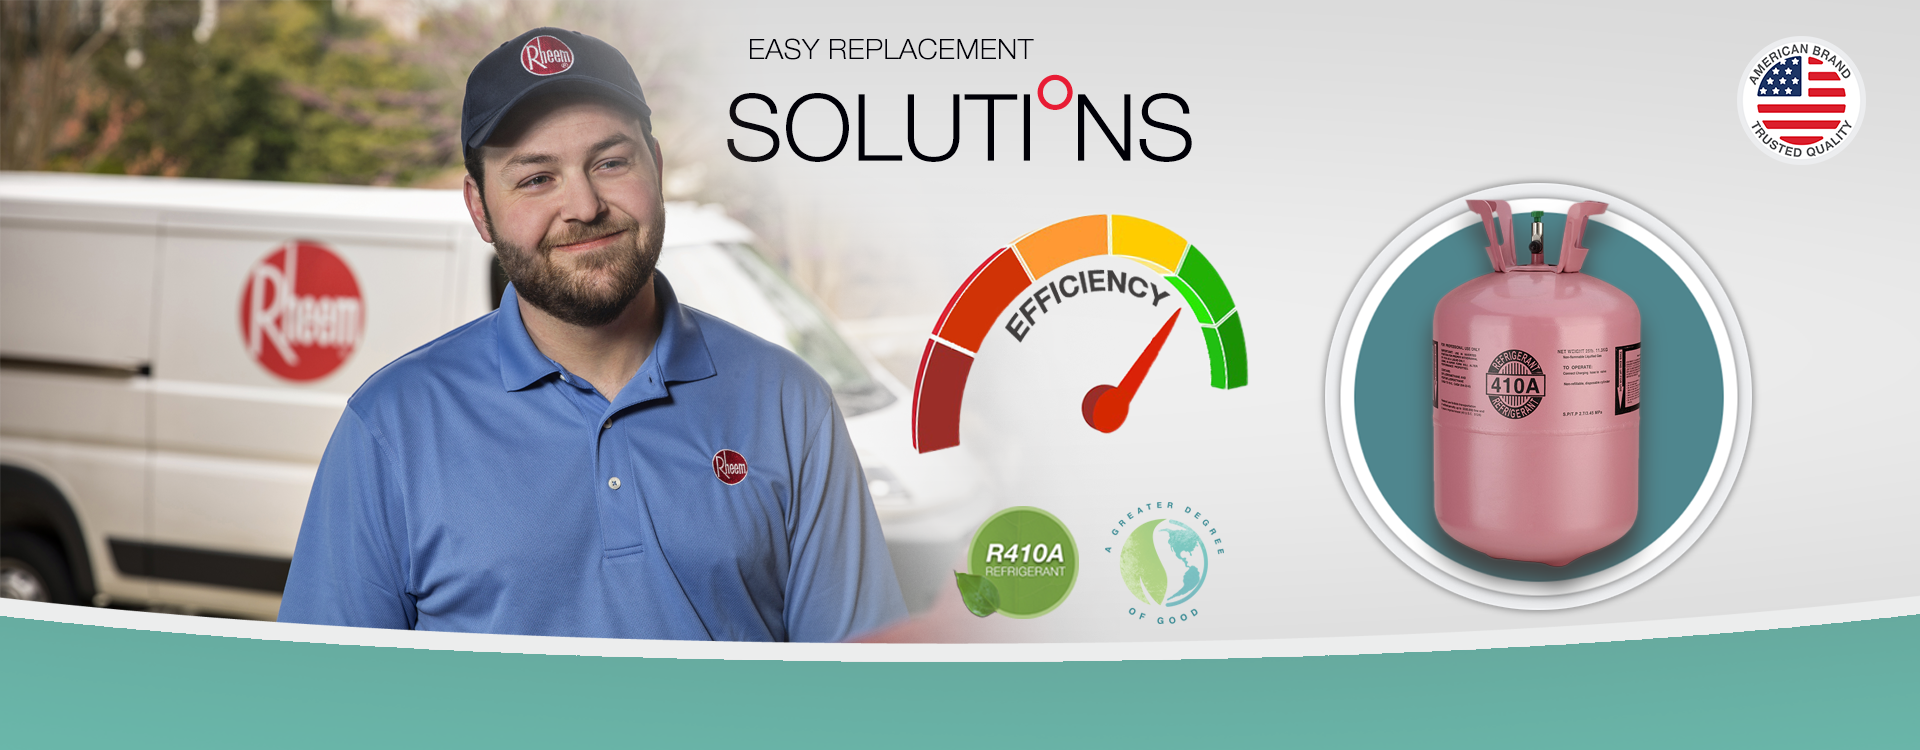 villa – easy replacement solutions